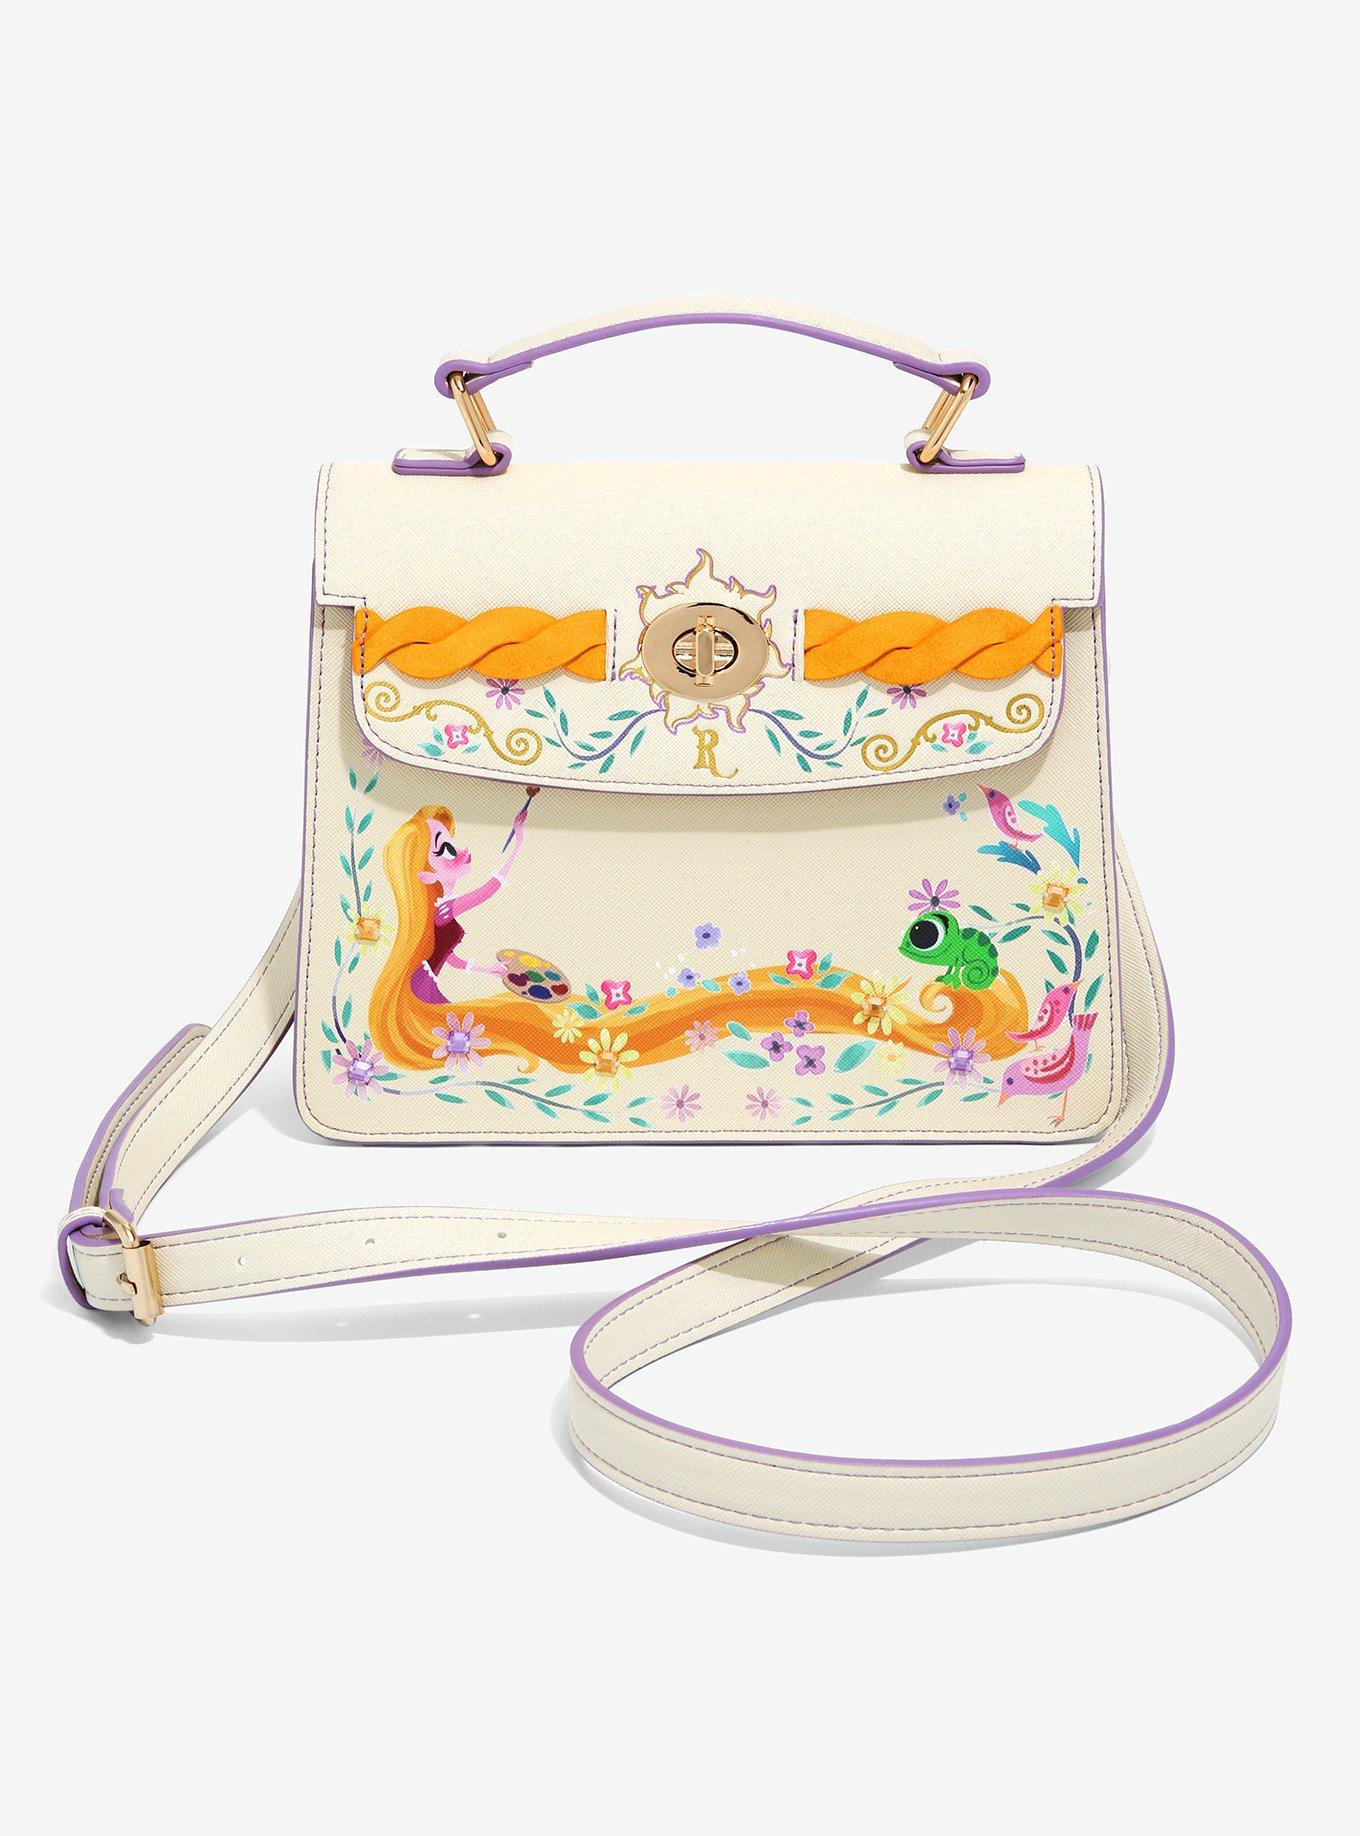 Disney Store Authentic Tangled Rapunzel Fashion Bag for Girls Purse Accessory 